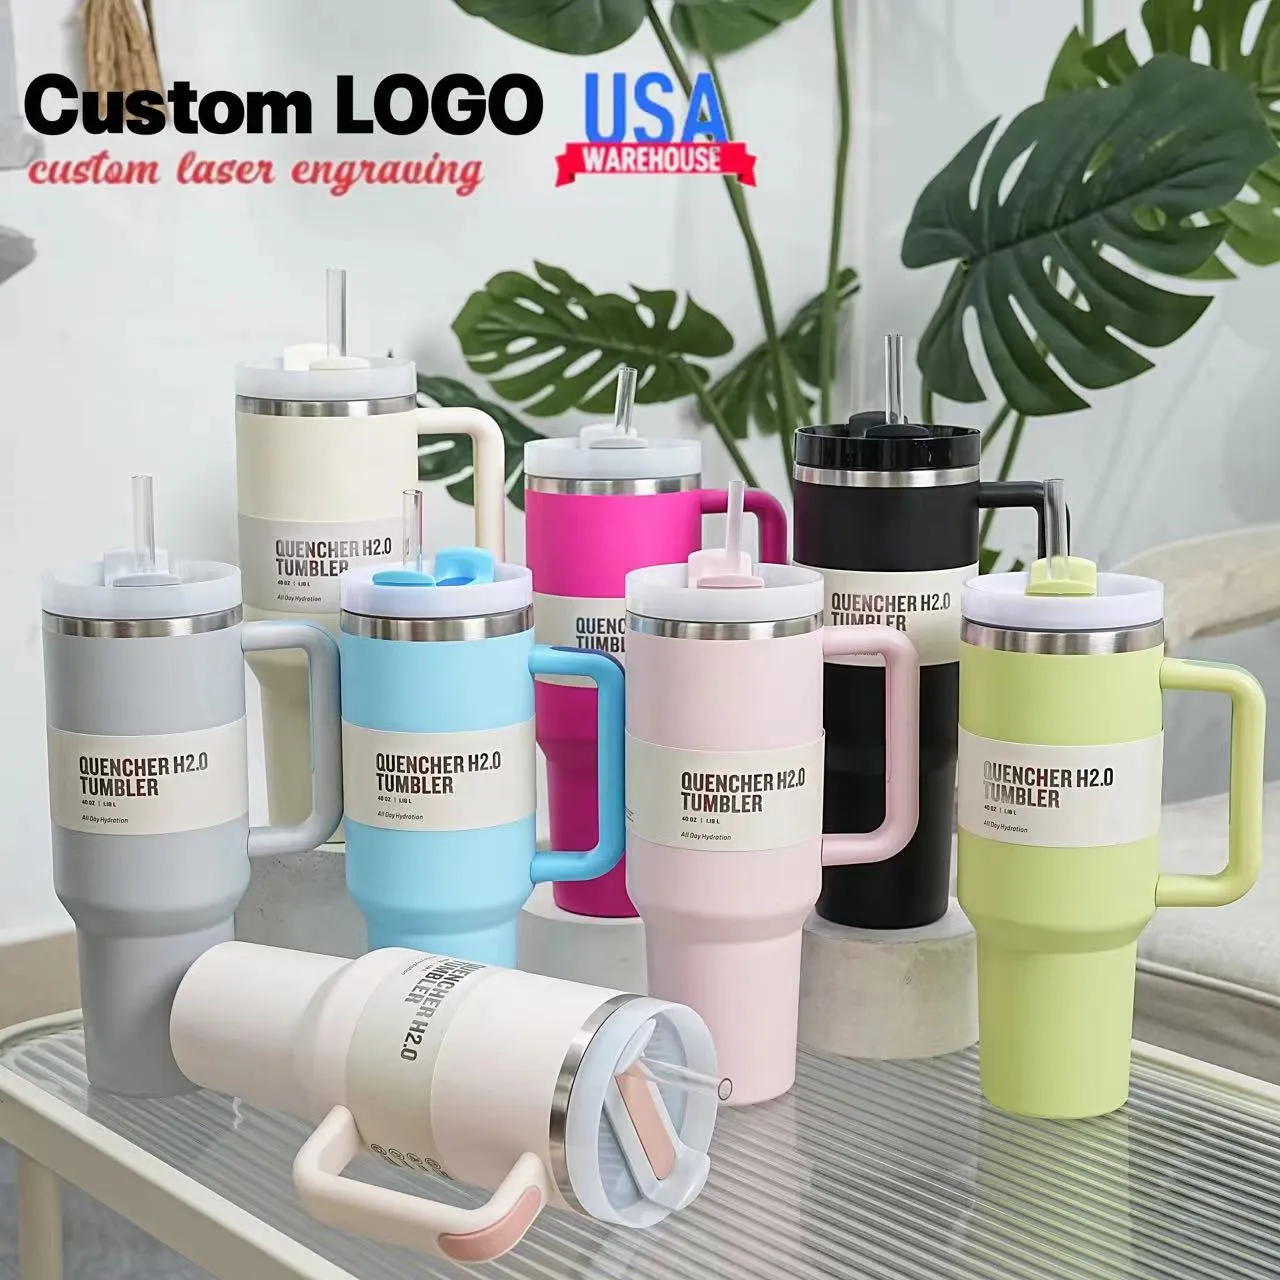 Rose Quartz Polar Swirl 40oz Quencher H2.0 Tumplers Coups Stainless Steel Coups with مقبض غطاء القش و Winter Winter Cosmo Pink Parade Red Holiday Car Mugs 0412